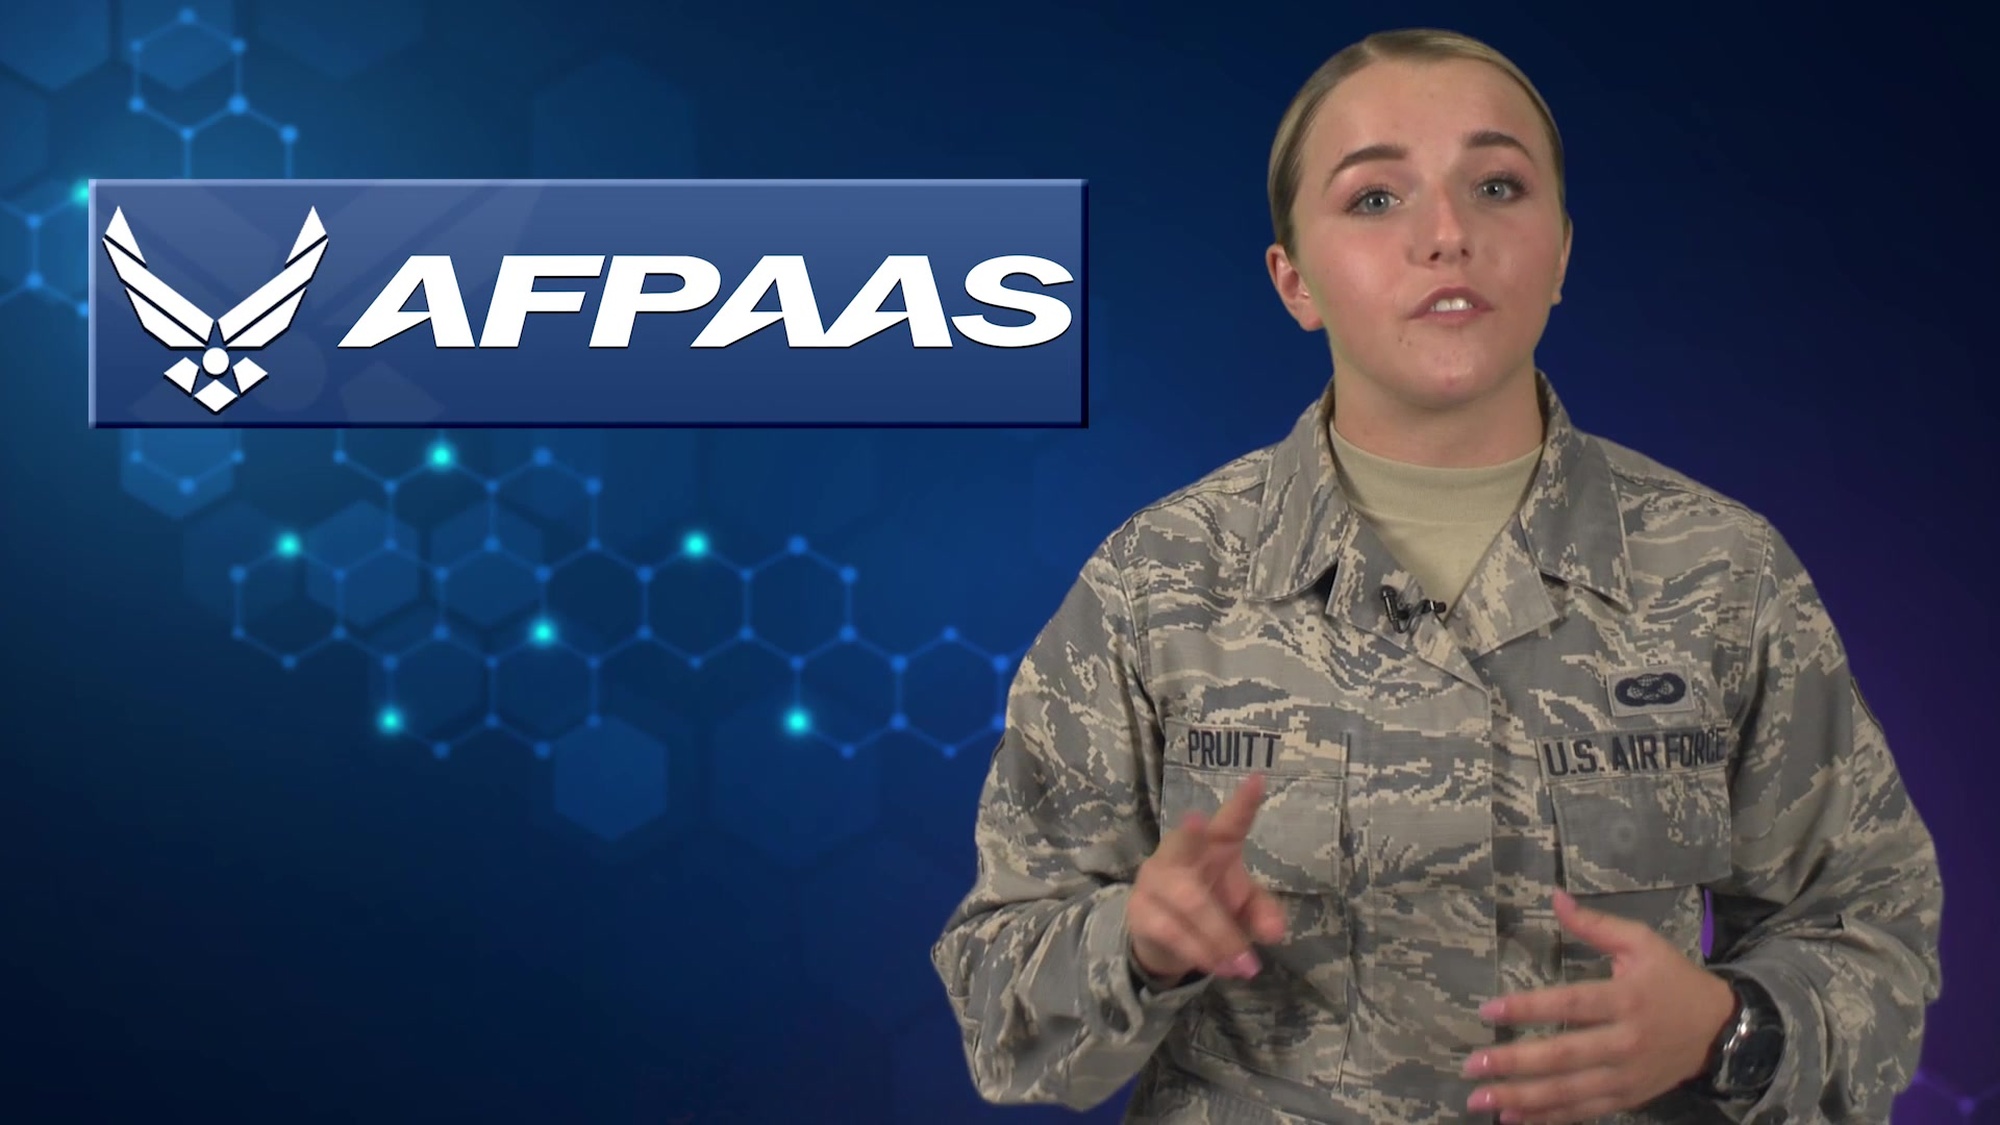 “AFPAAS for Commanders” – a short overview of unit commanders’ responsibility to ensure 100% accountability of all members, to include their families, during an AFPAAS accountability drill or real-world event.